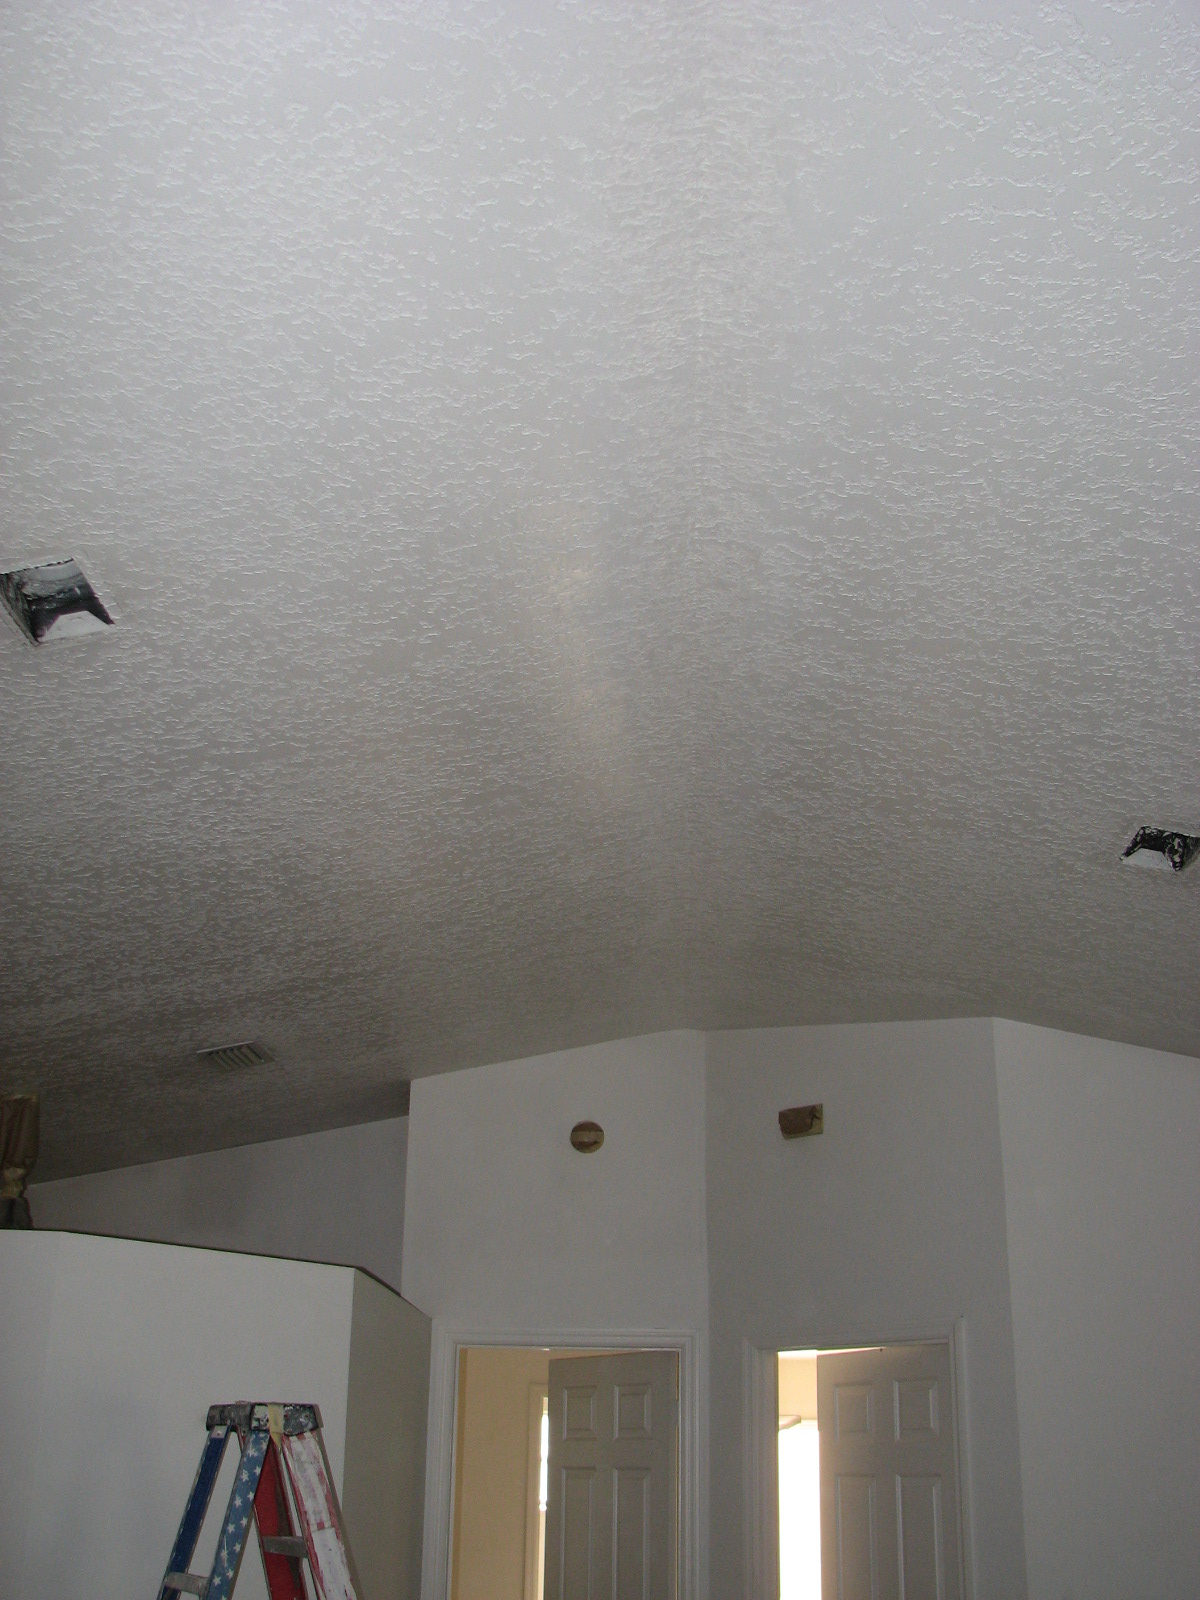 Vaulted Ceiling Repair Archives Peck Drywall And Painting